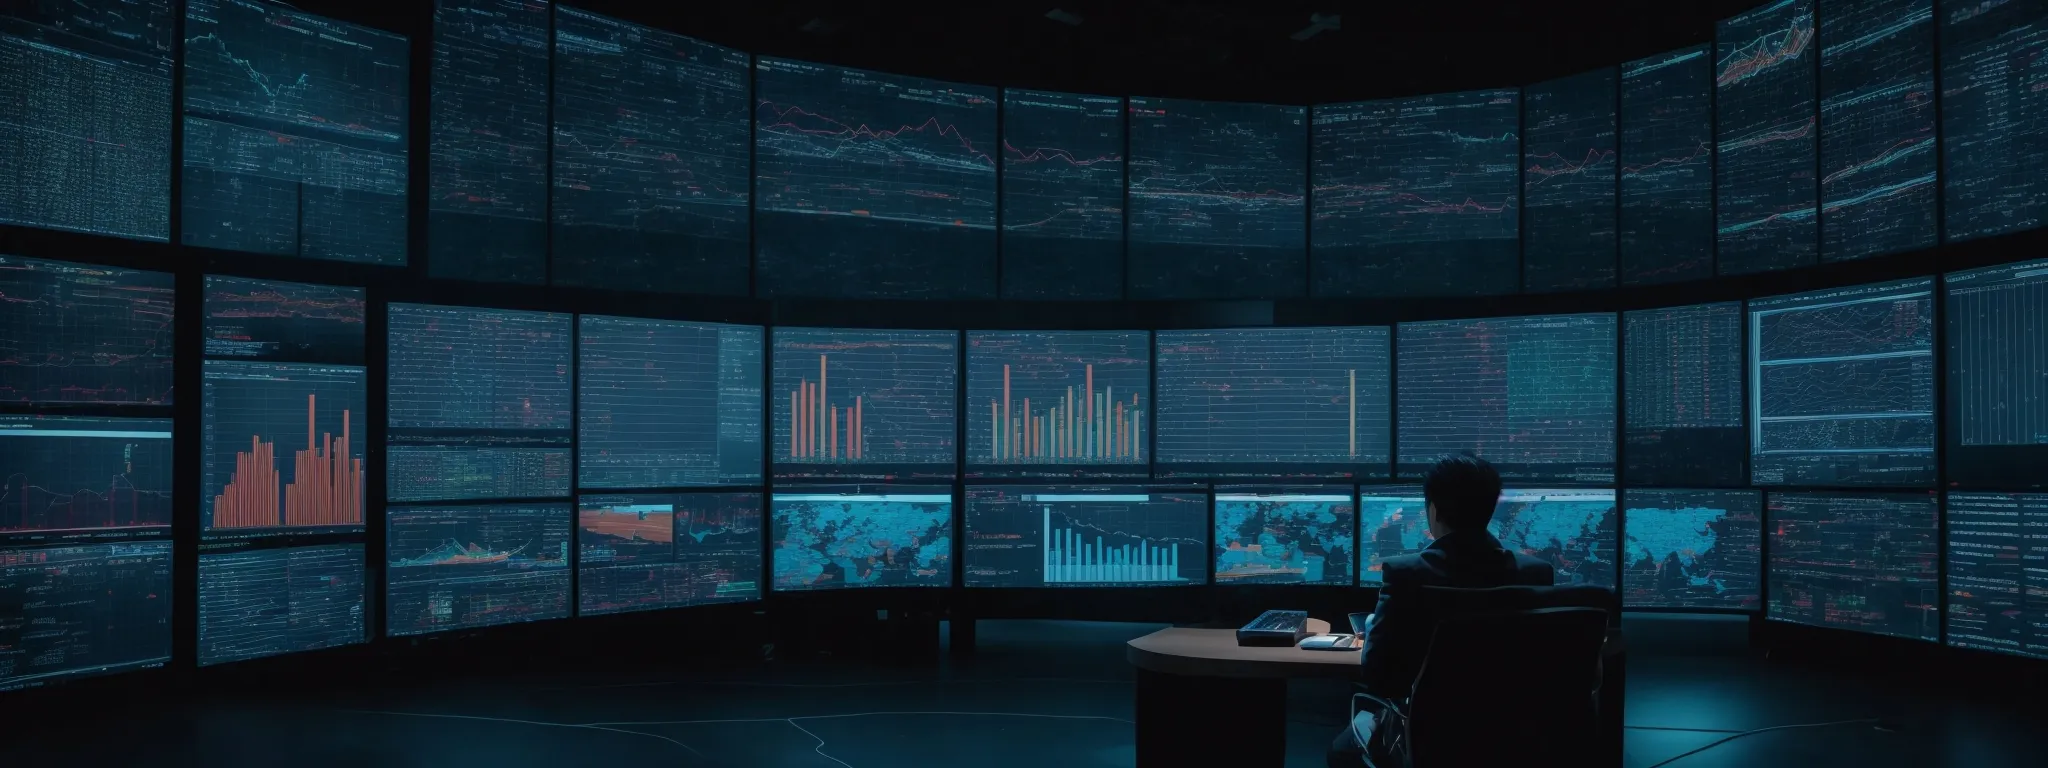 a person sits in front of a massive array of screens displaying web analytics and ai data visualizations.